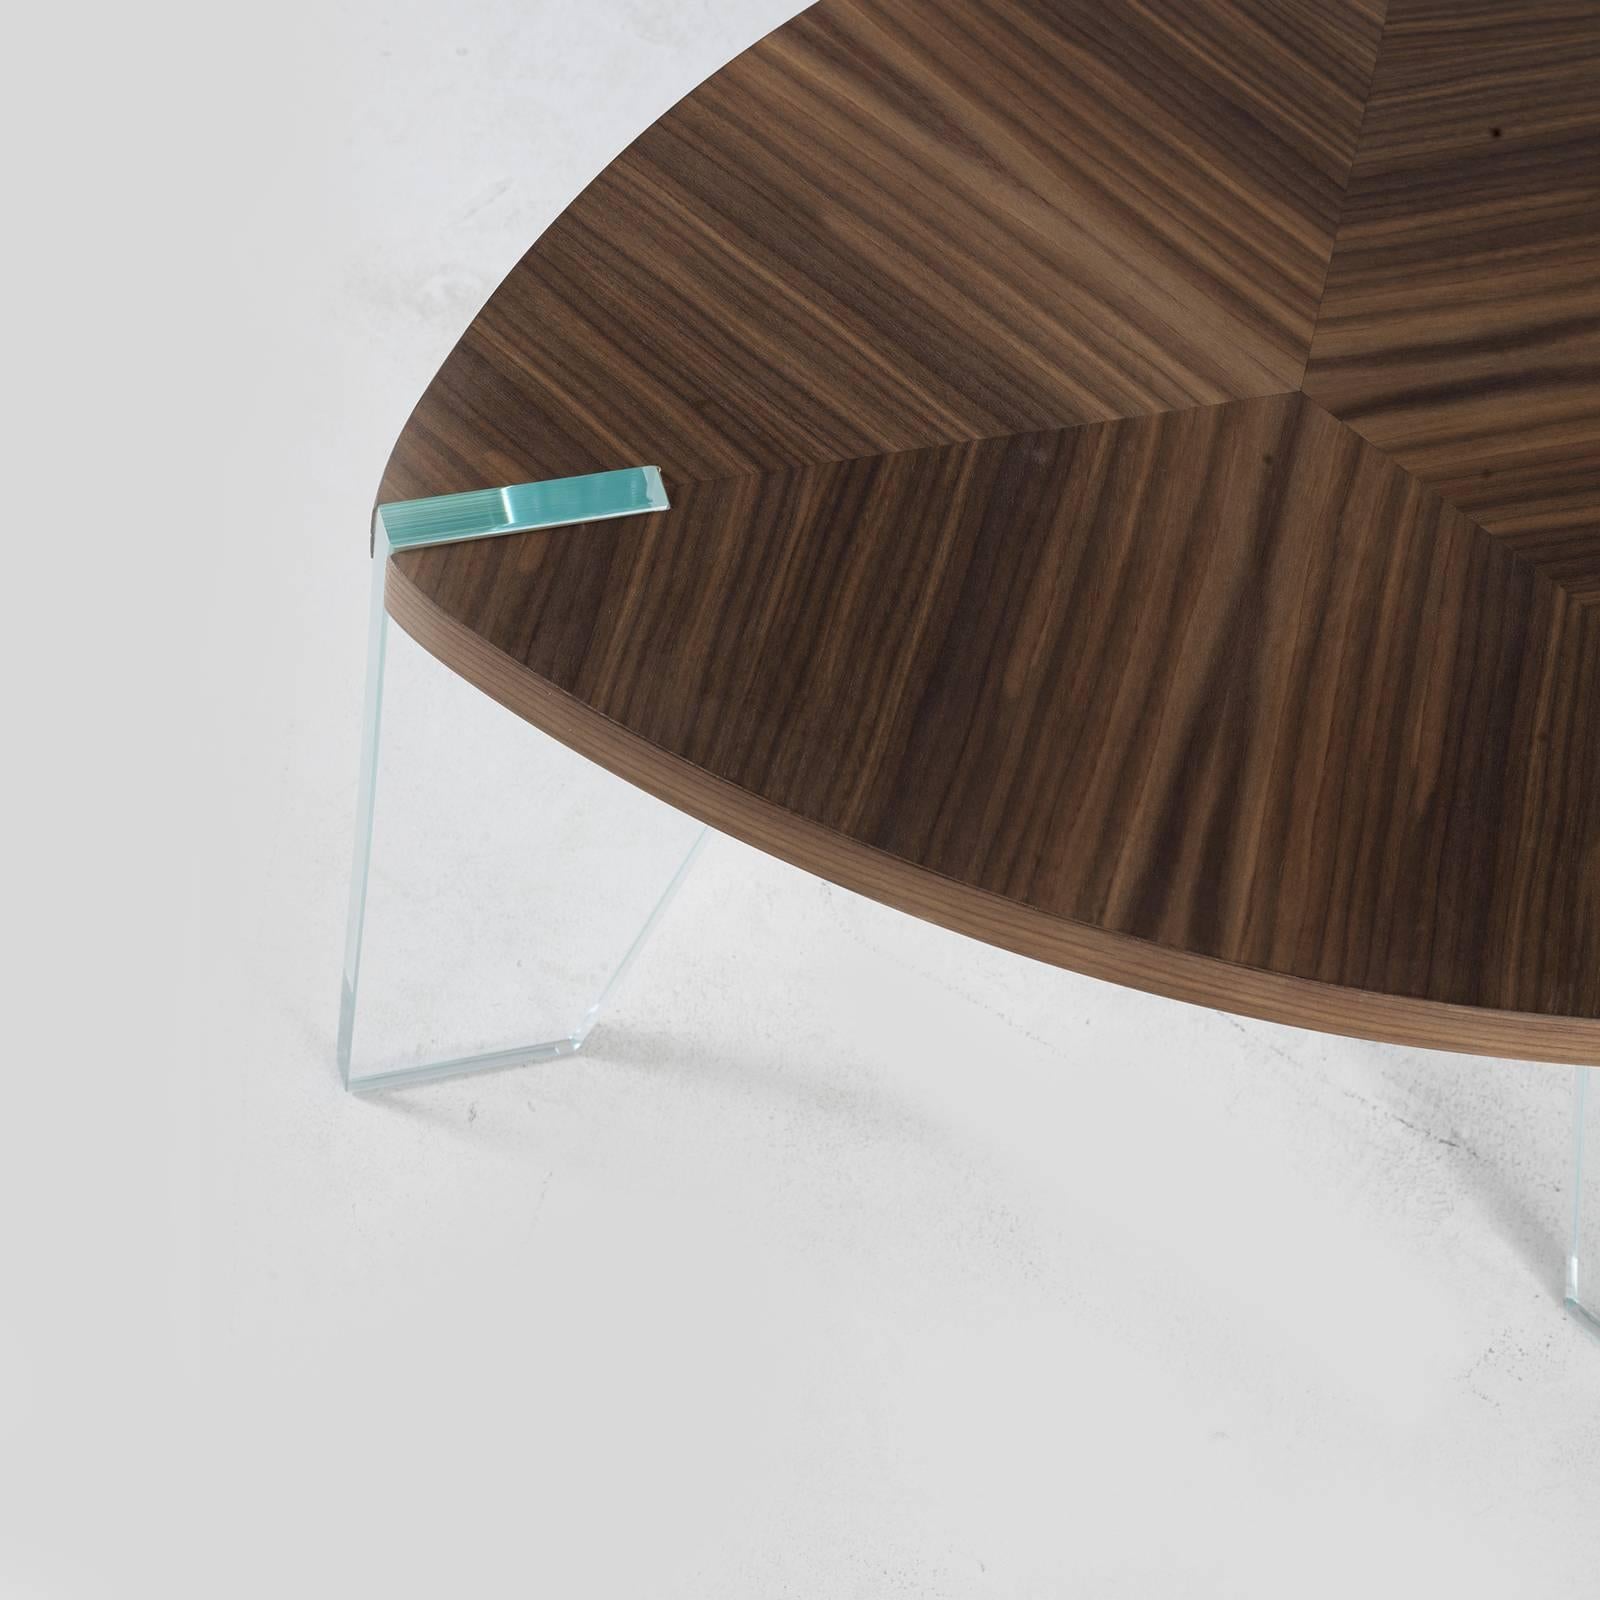 The walnut triangular top with rounded corners of this captivating coffee table becomes a lightweight shelf when supported by three extra-clear tempered glass legs. The surface is enhanced by the wood grain and an elegant herringbone pattern and